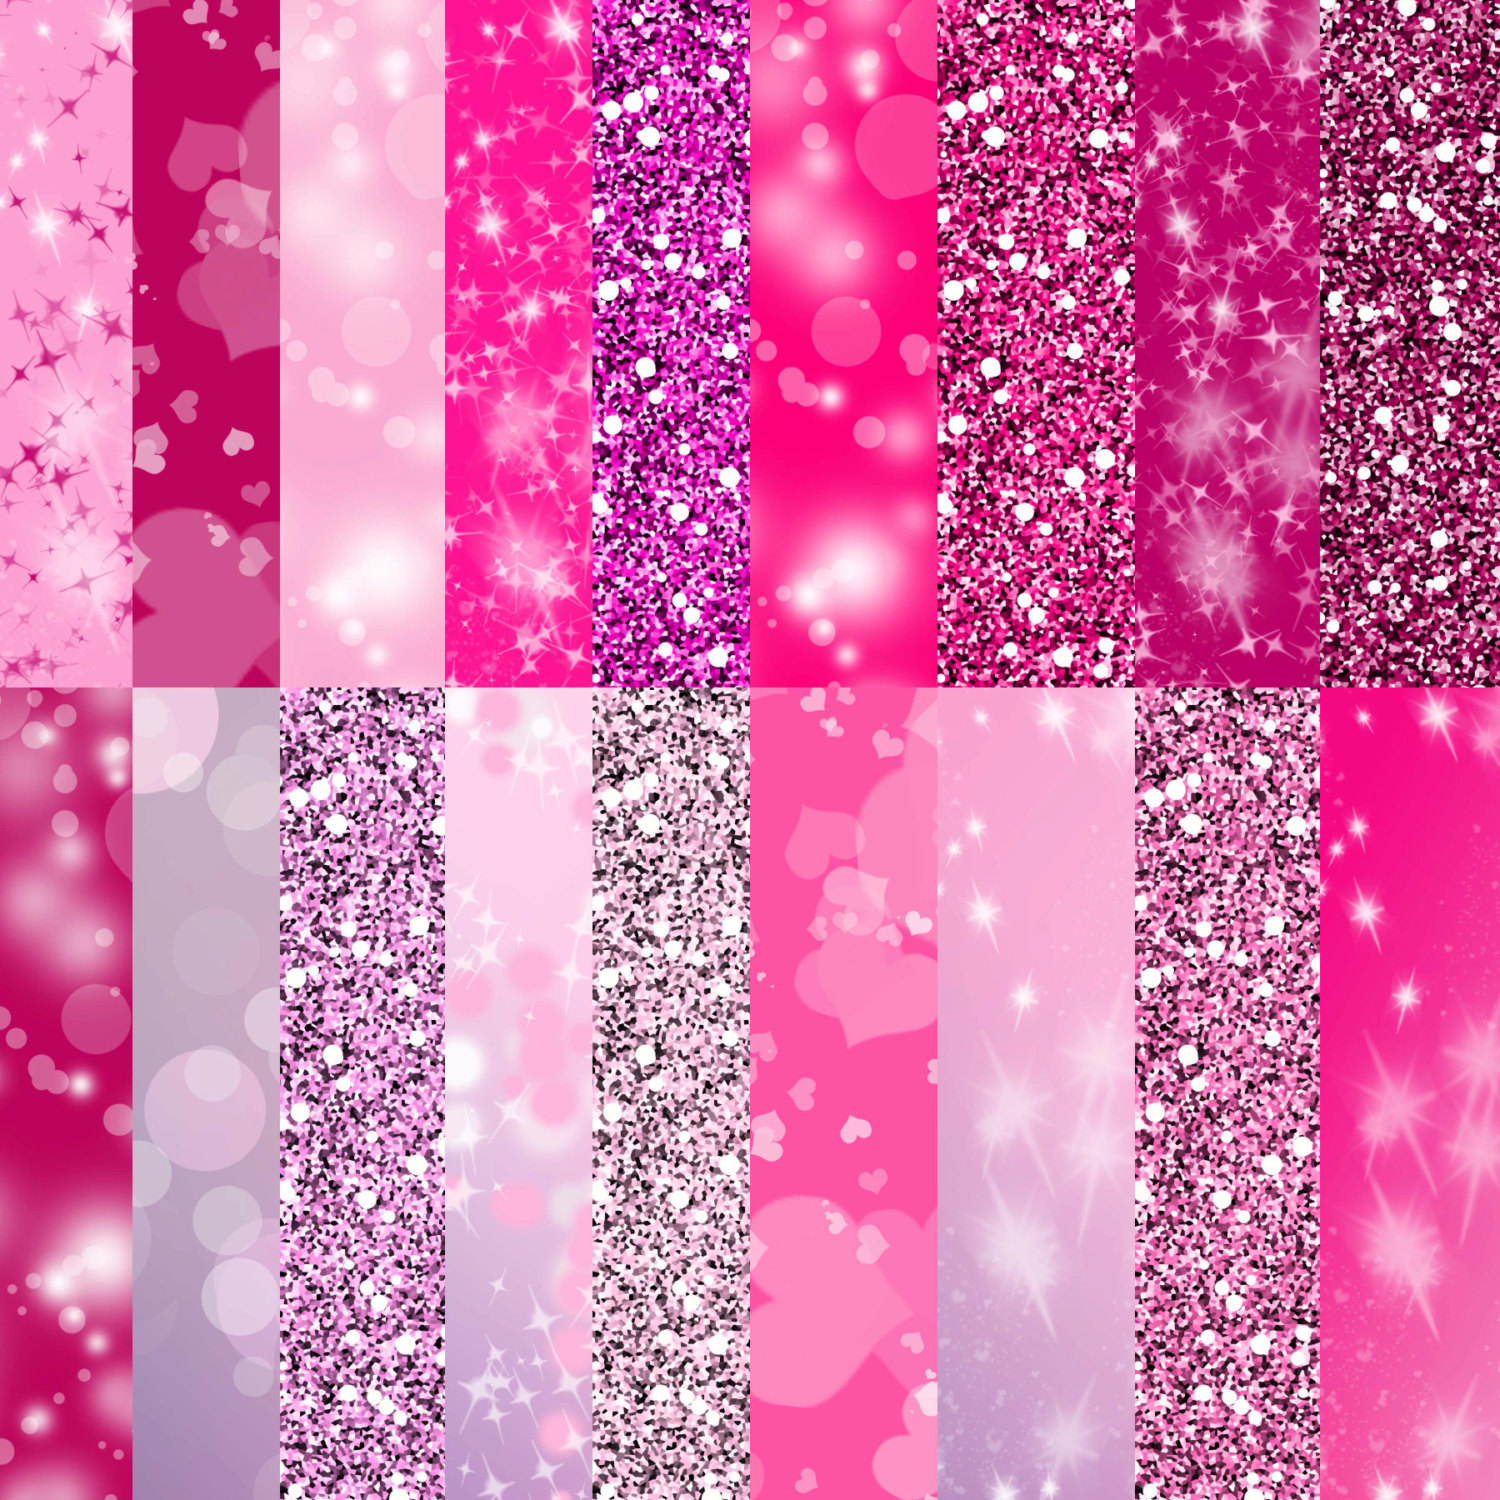 Gallery For Gt Cute Pink Glitter Background